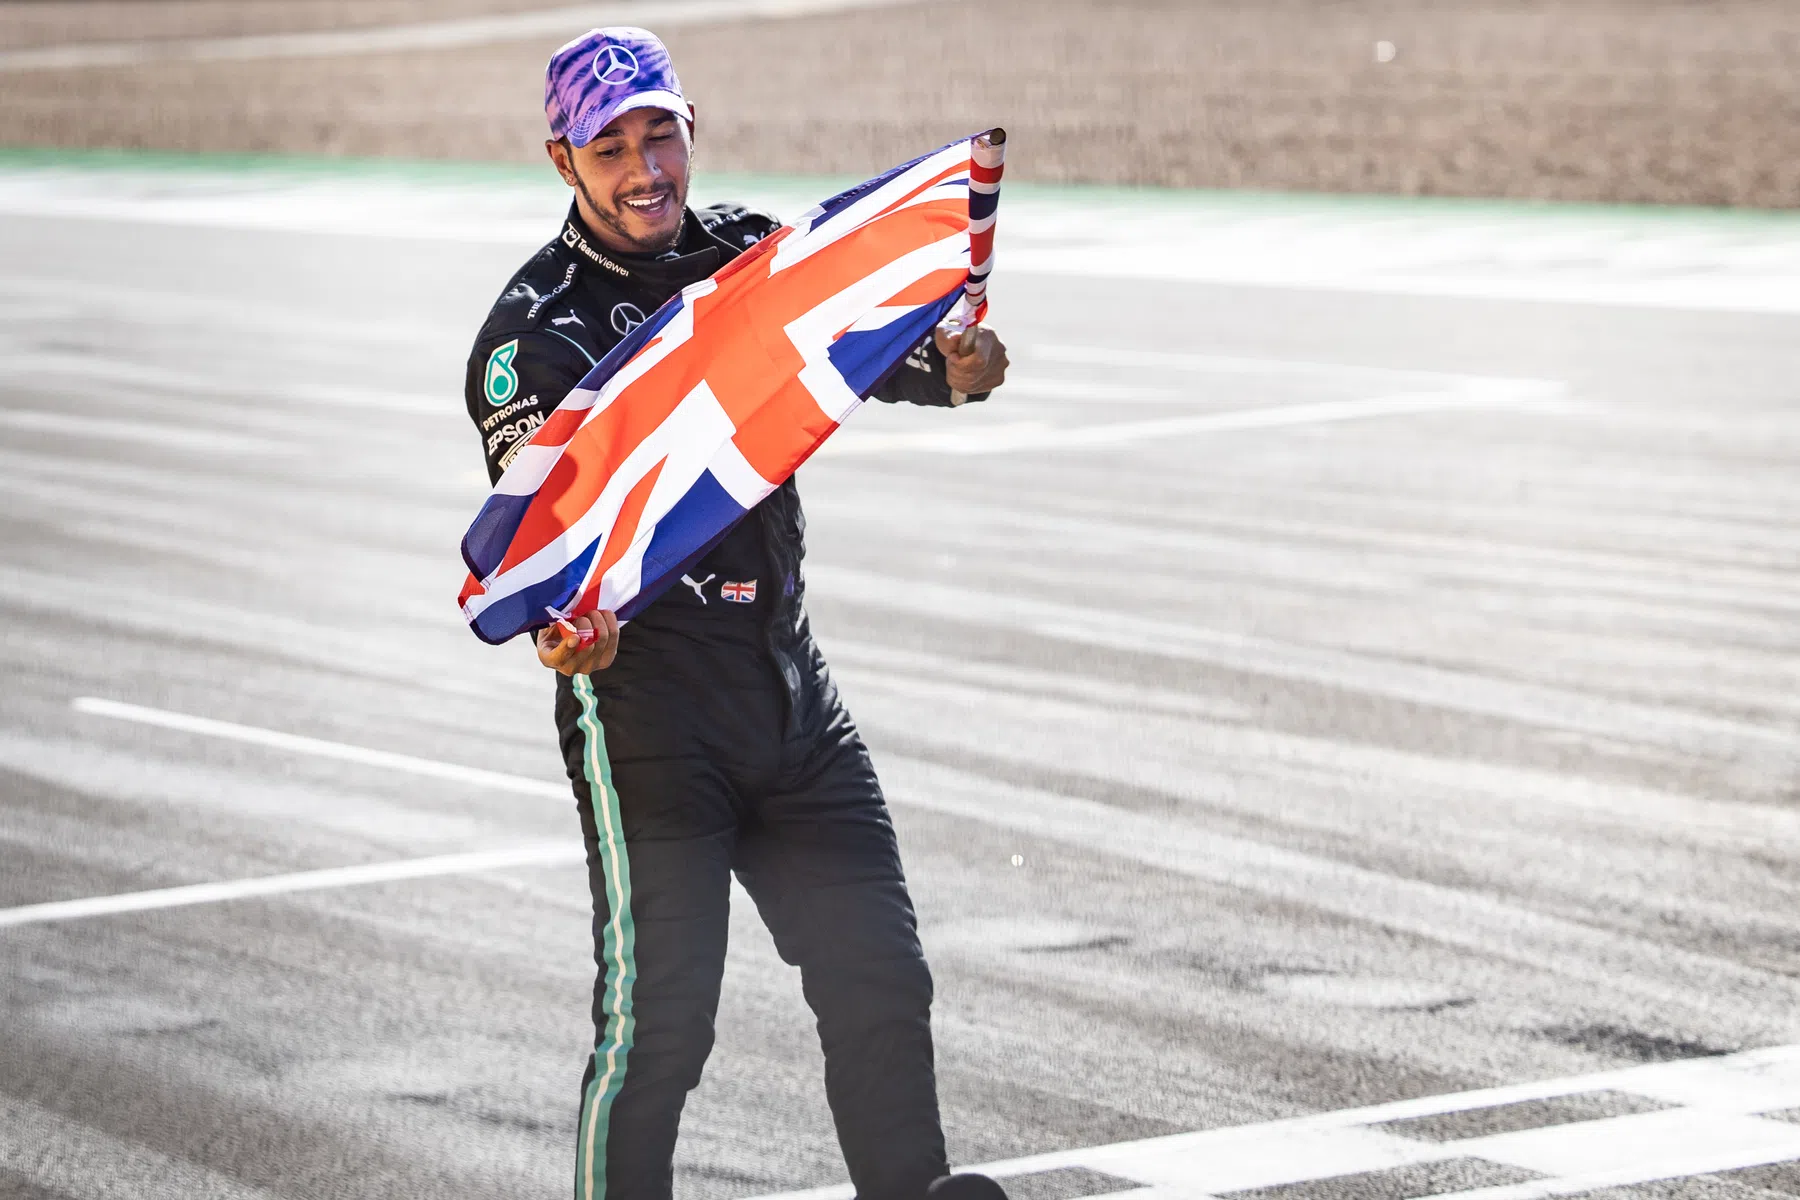 Drivers set to take over Hamilton as the flag-bearer of British F1